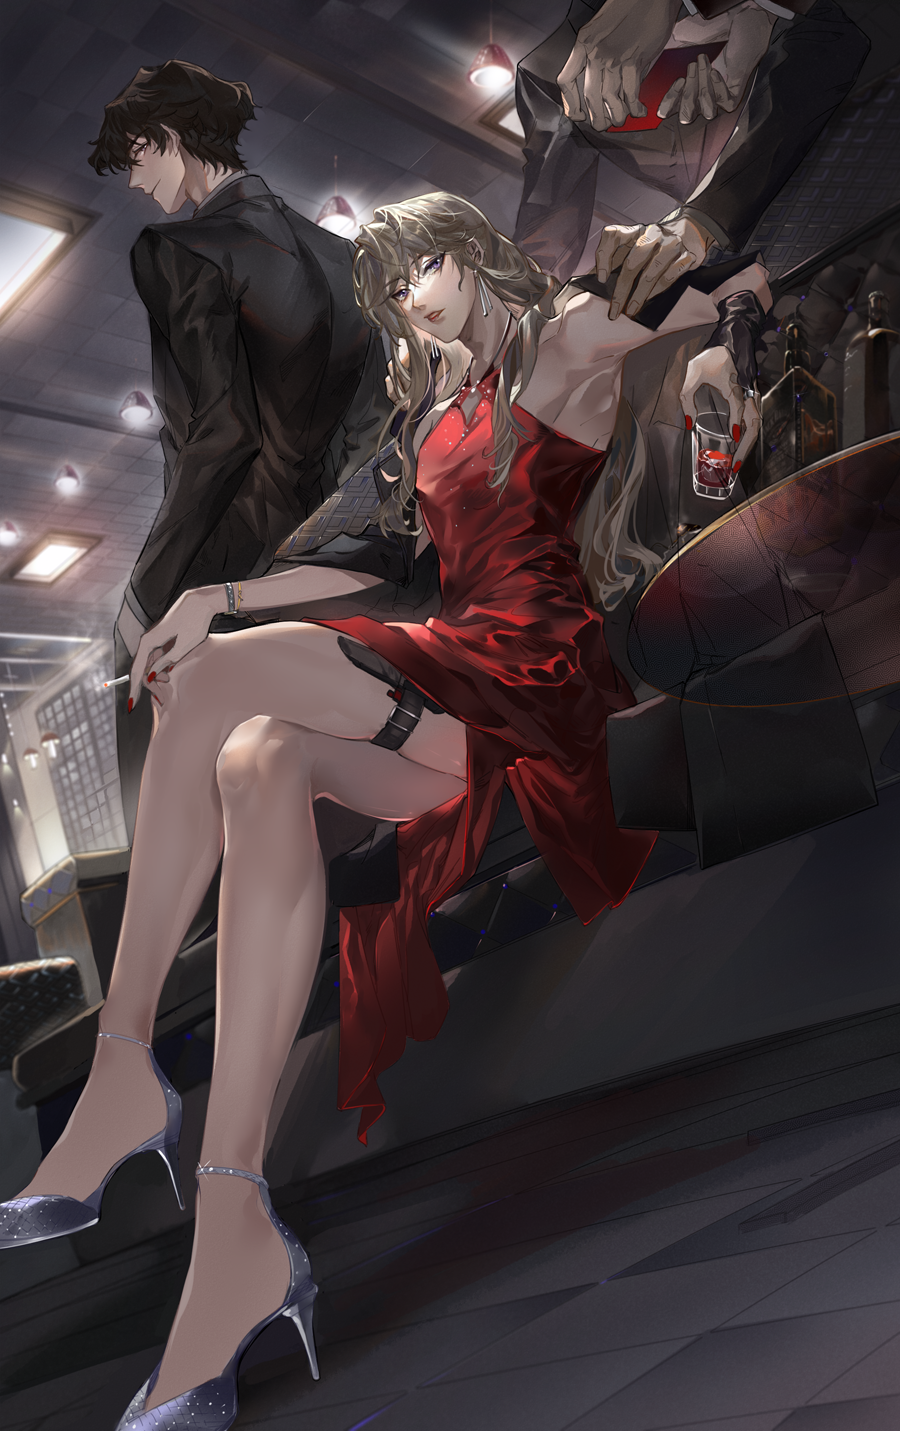 4boys alcohol banba_zenji black_hair black_pants blonde_hair bottle bracelet couch crossdressing dress dutch_angle earrings formal hakata_tonkotsu_ramens hand_on_shoulder high_heels highres holding holding_knife holster indoors jewelry knife long_hair long_sleeves looking_back manly multiple_boys necktie pants red_dress red_nails ring sitting suit table thigh_holster xianming_lin yinzinmiemie